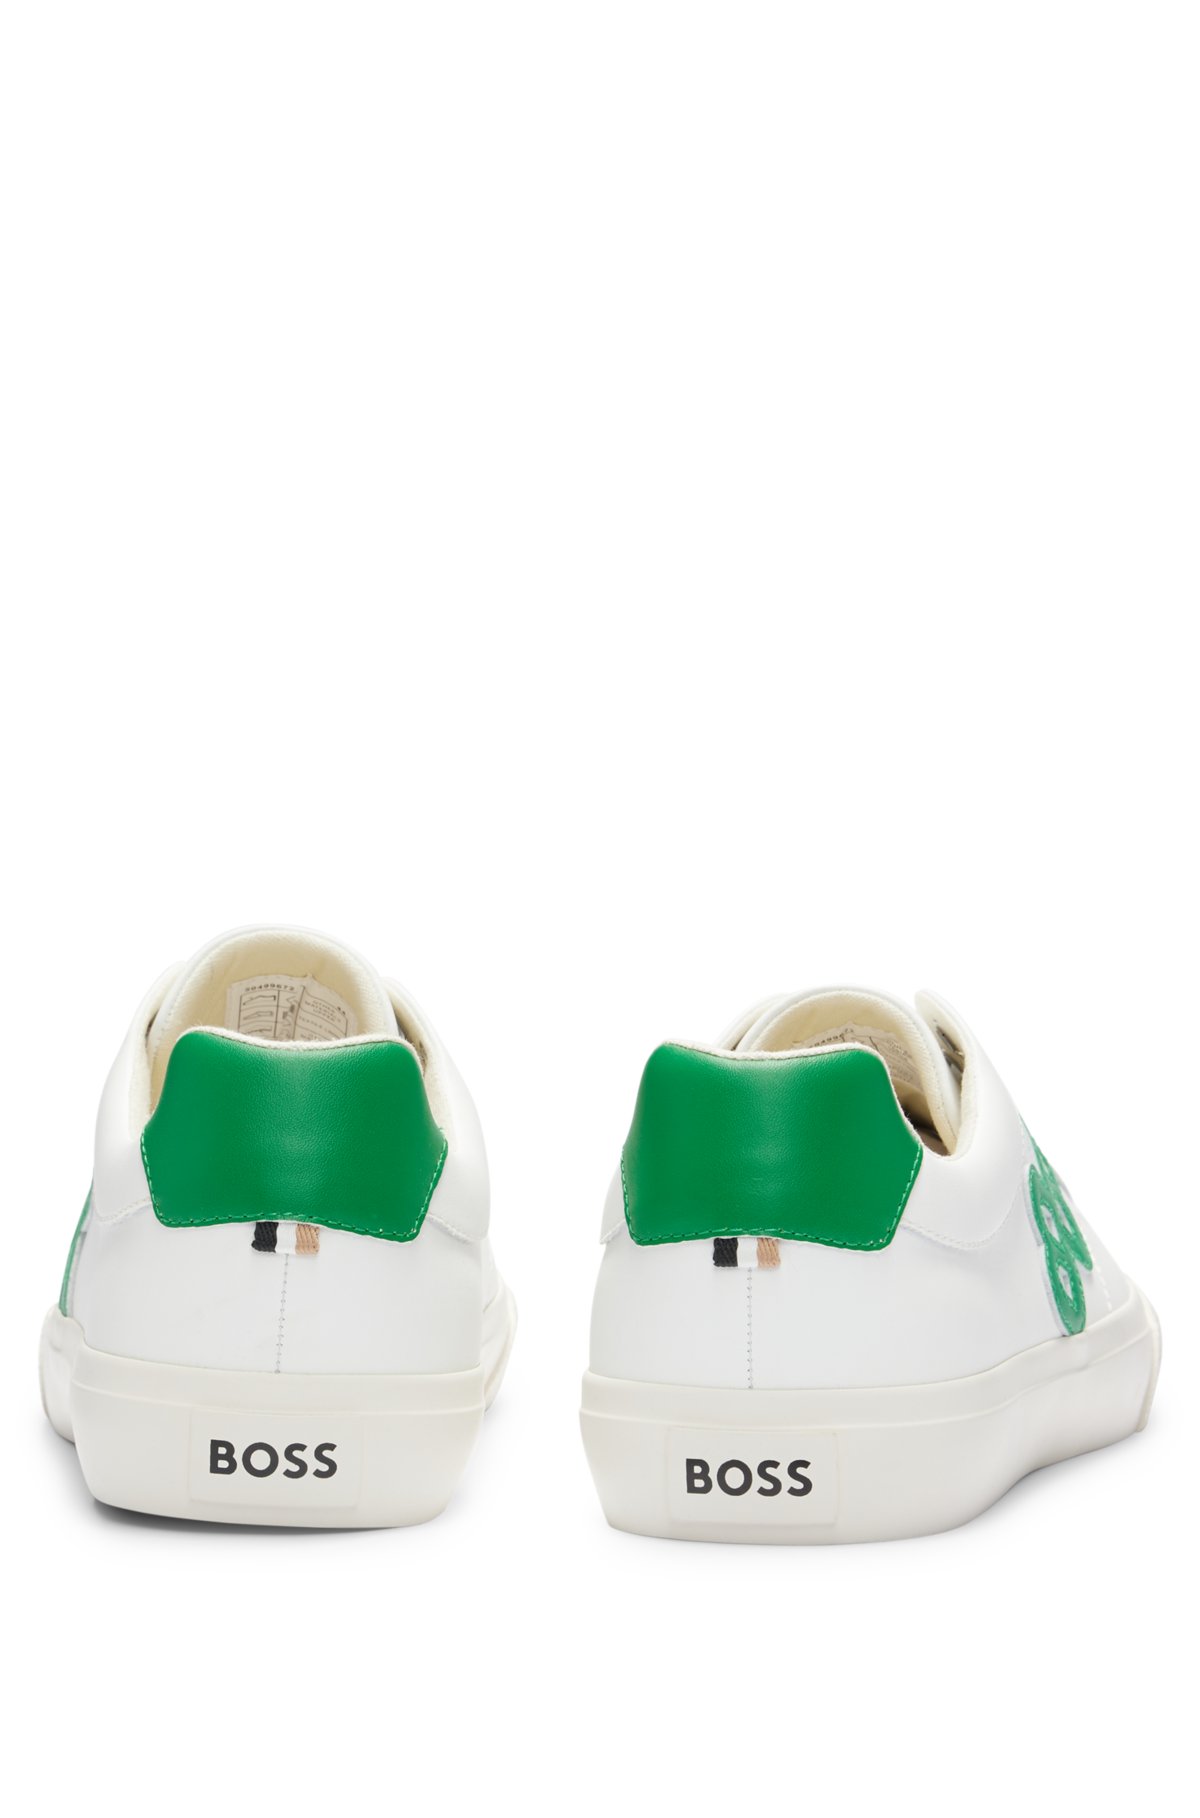 Low-top trainers with monogram detail , White